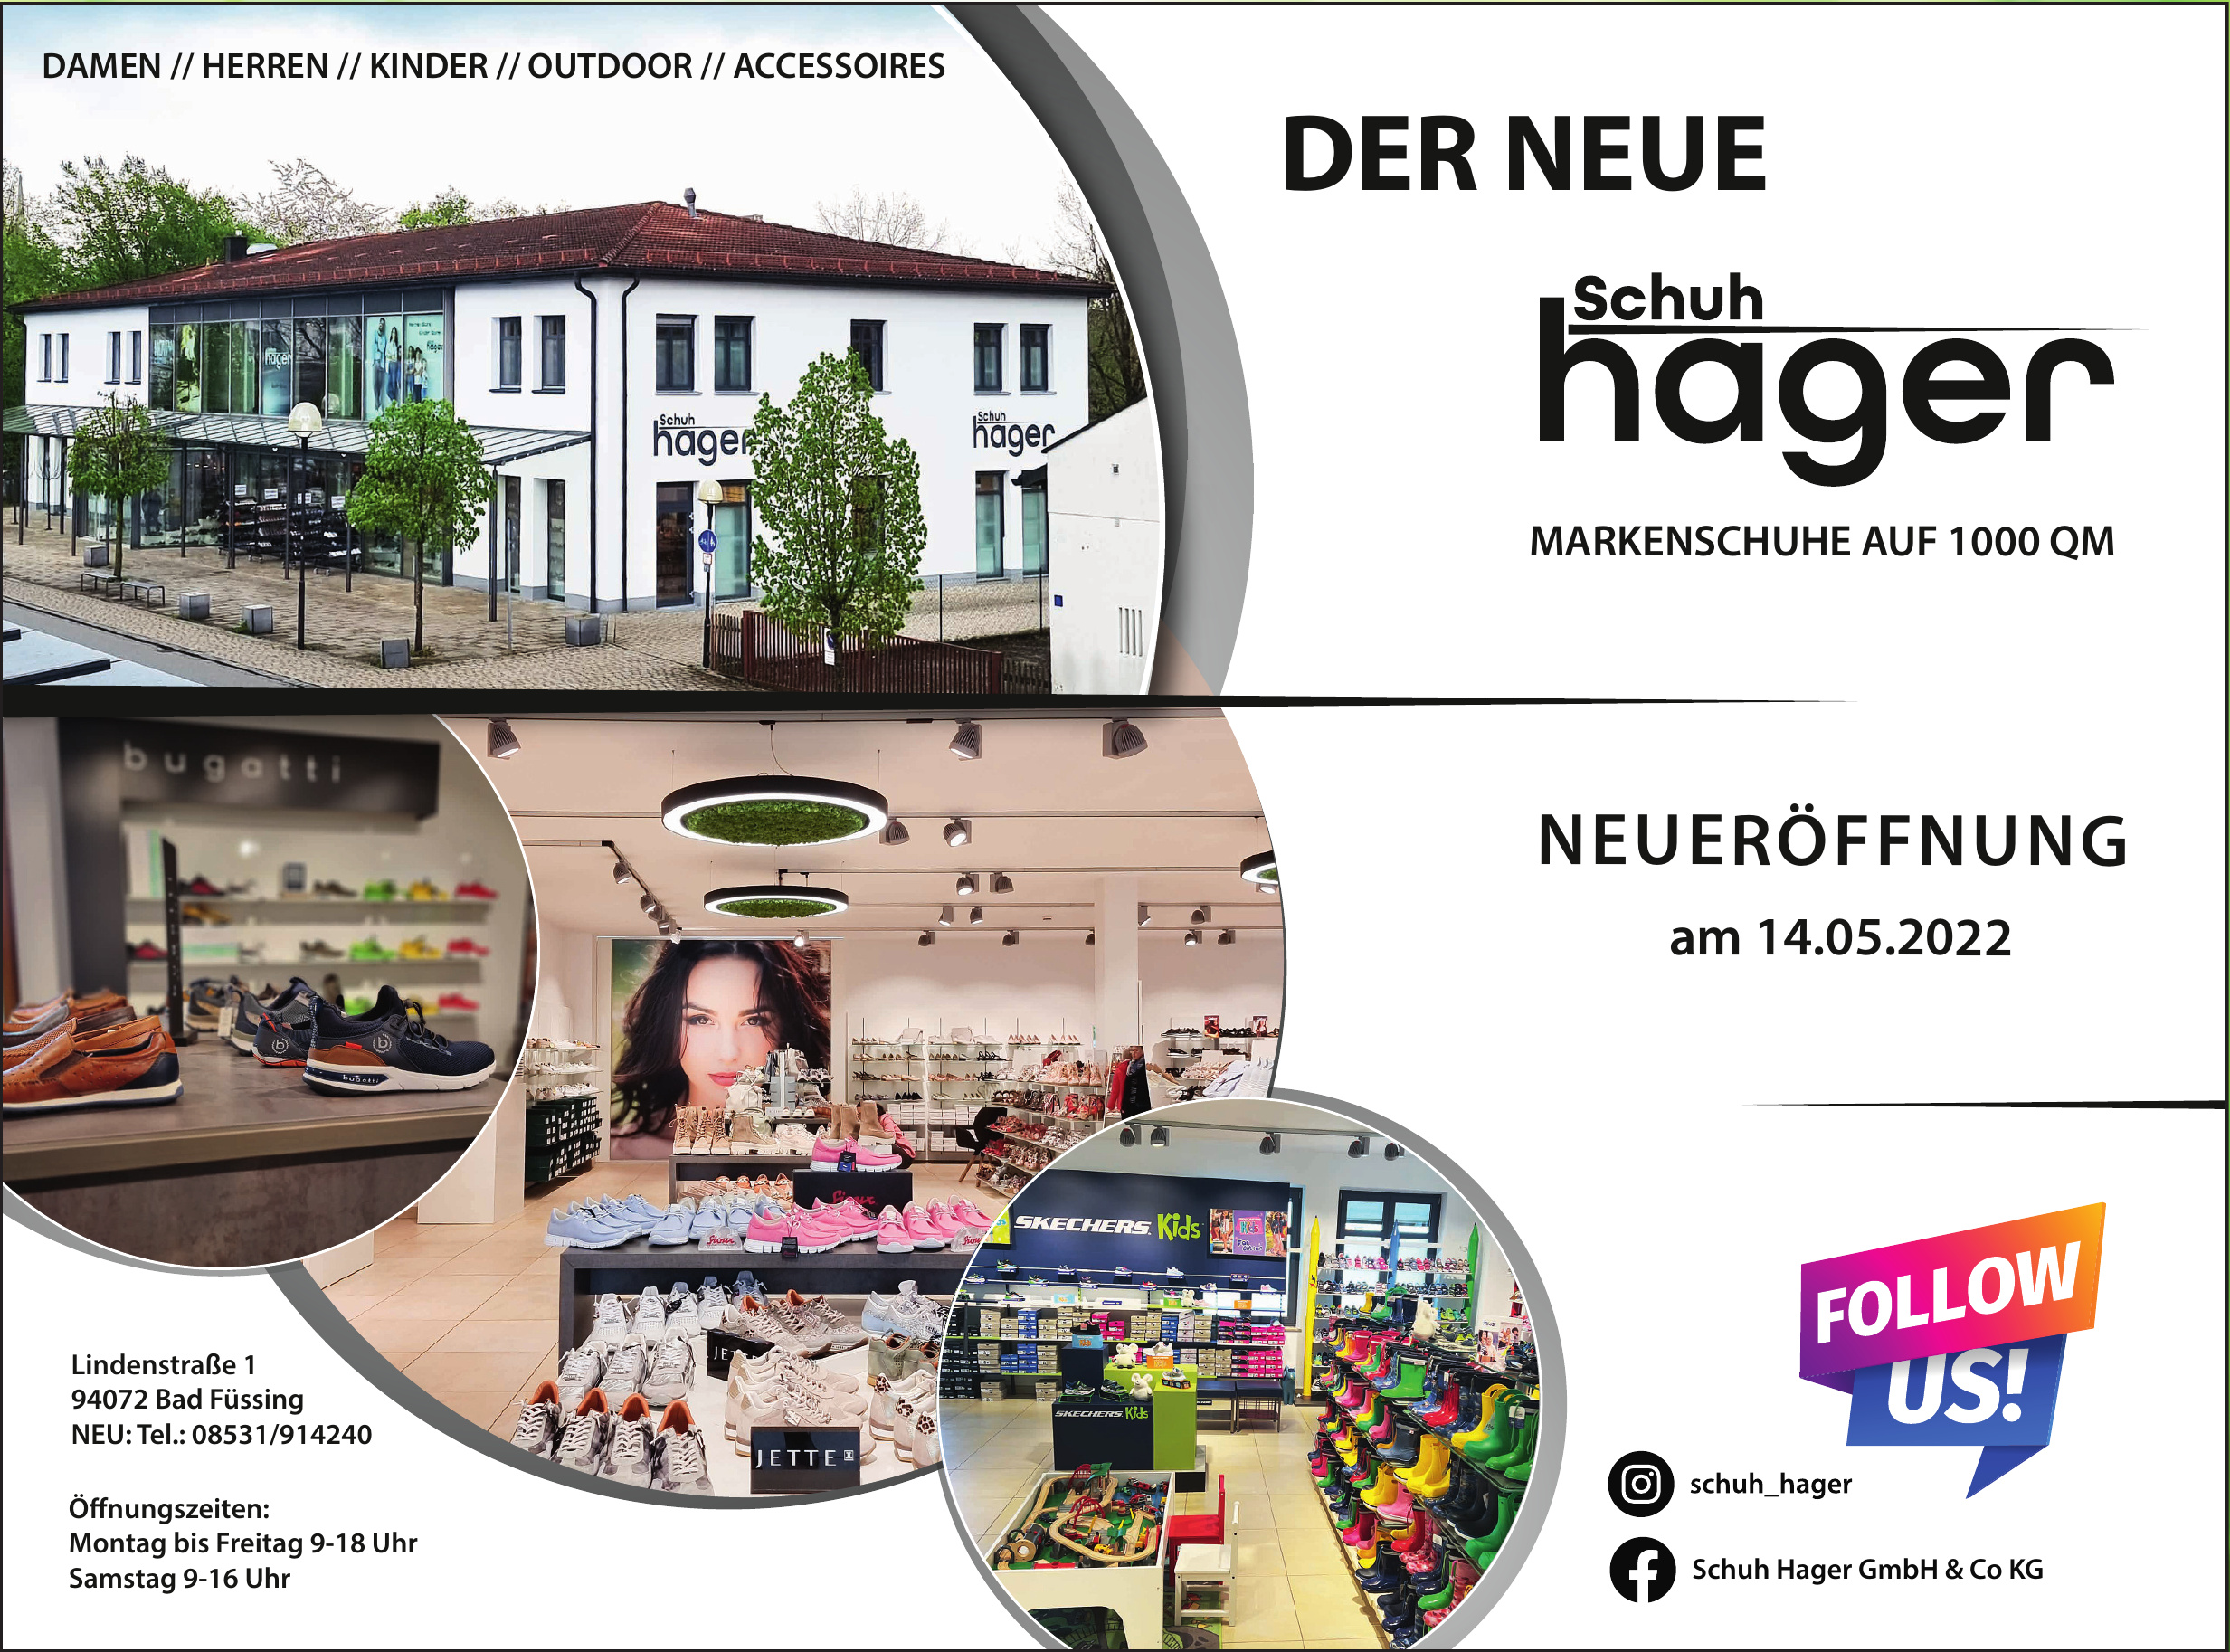 Schuh Hager GmbH & Co KG